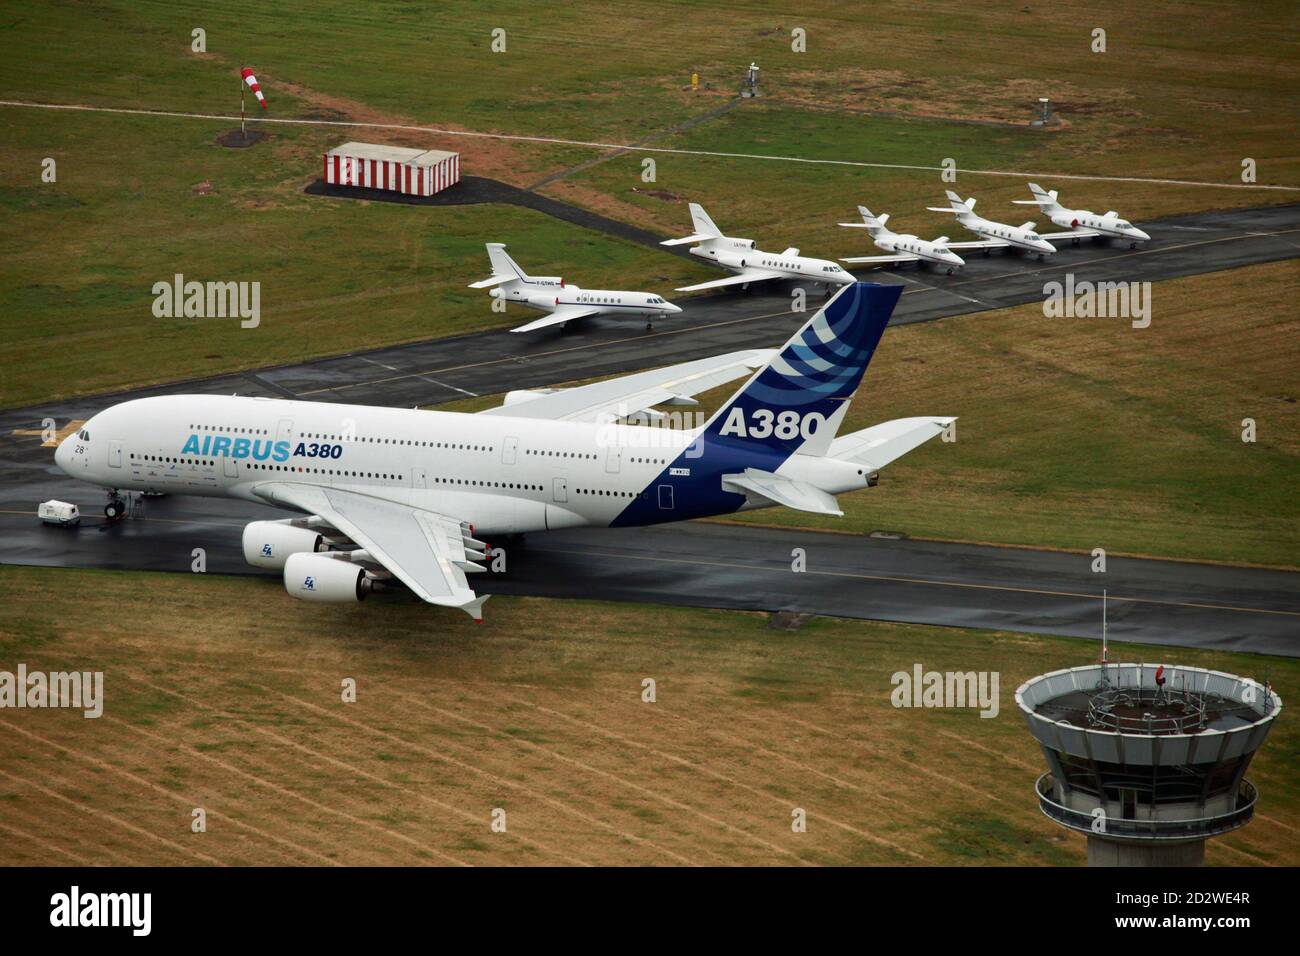 View The Airbus A380 High Resolution Stock Photography And Images Alamy